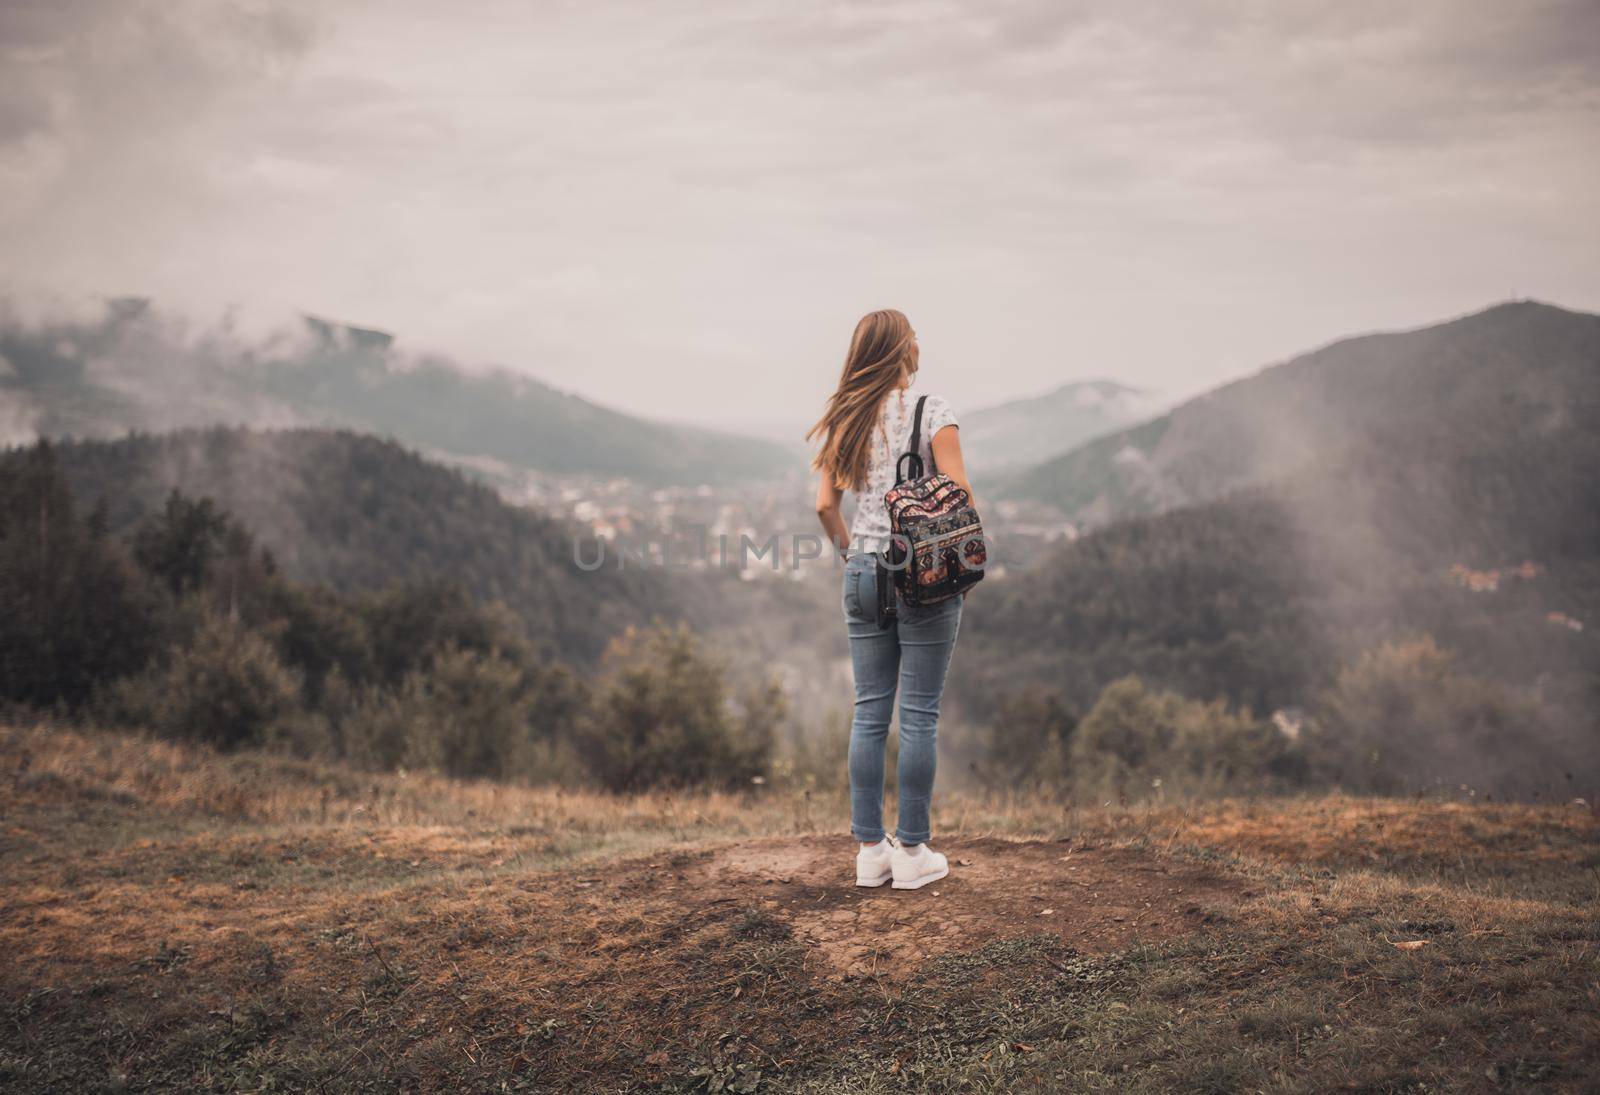 Young blonde woman standing alone with backpack on wild forest mountains at background. European girl wear tight jeans and white t-shirt sneackers. Carpathian Mountain peaks in fog scenery landscape